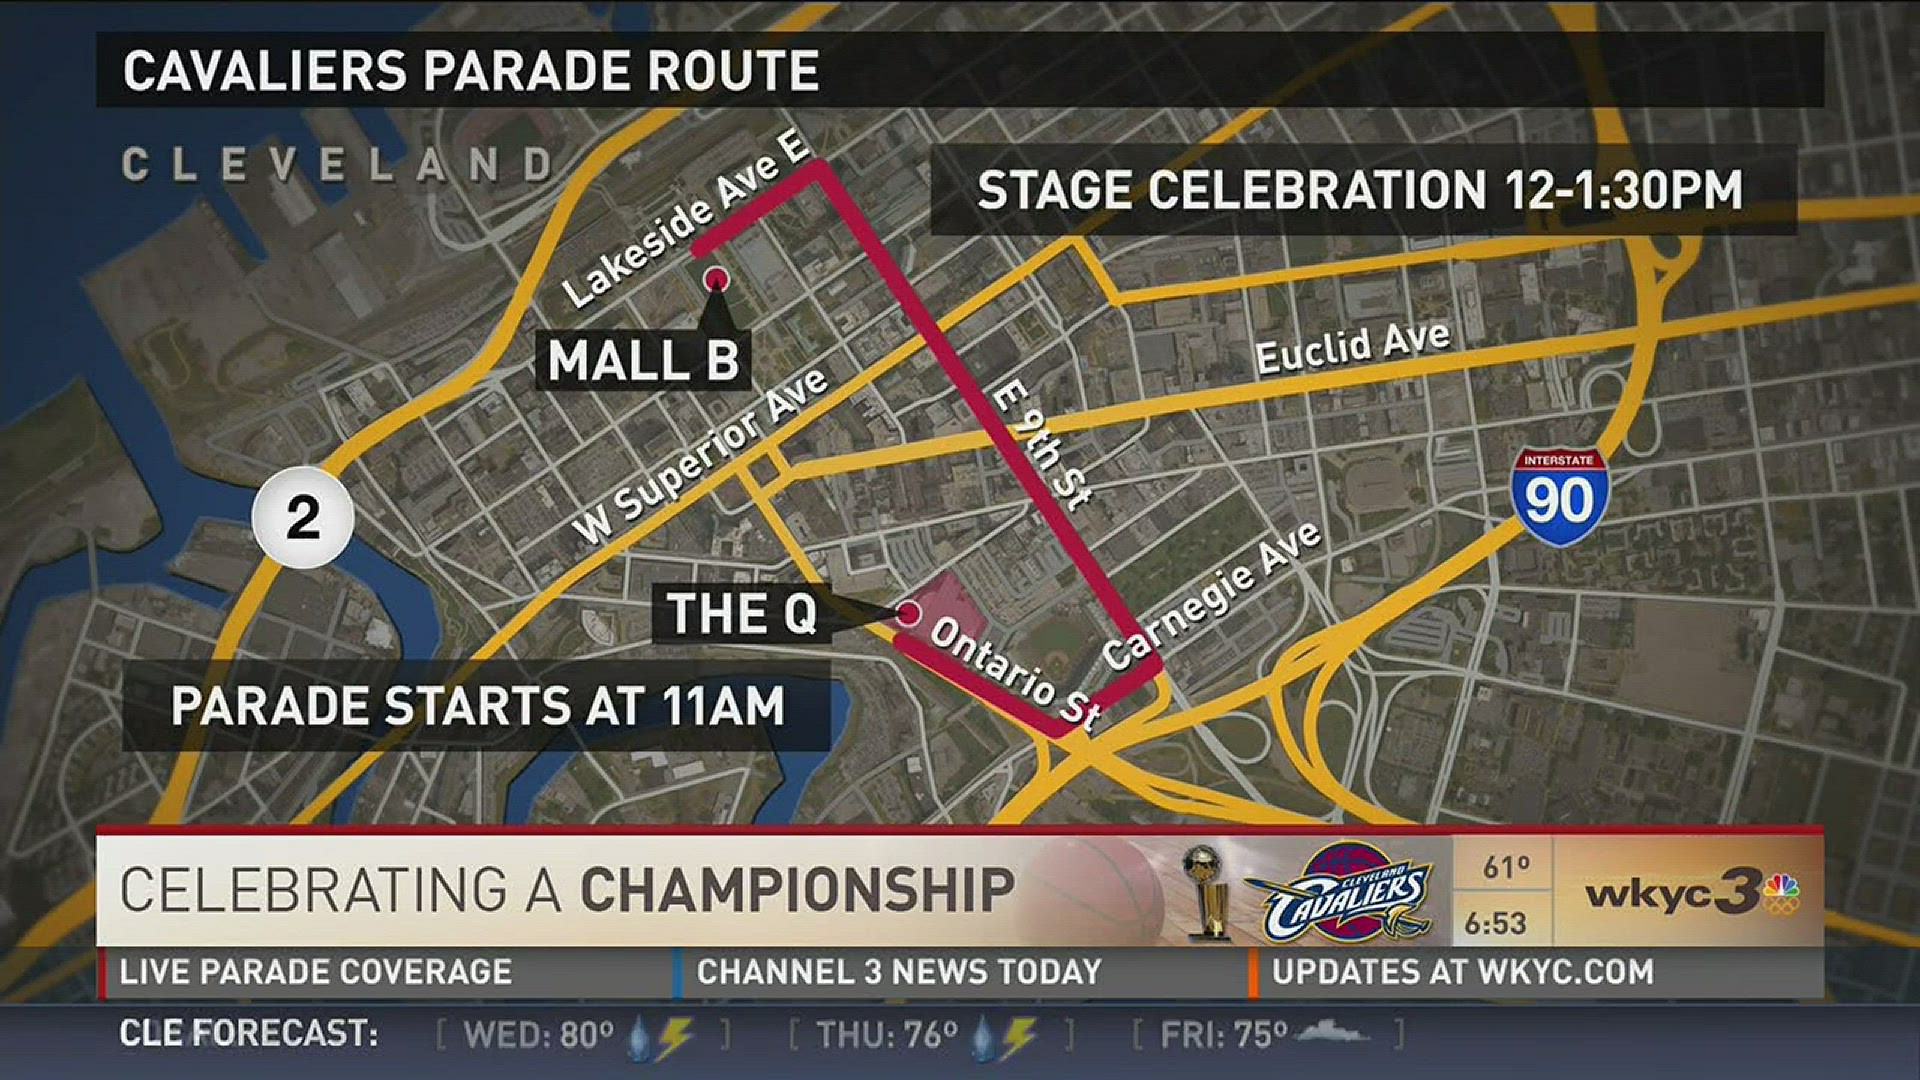 Parade Route Map: Where you can go